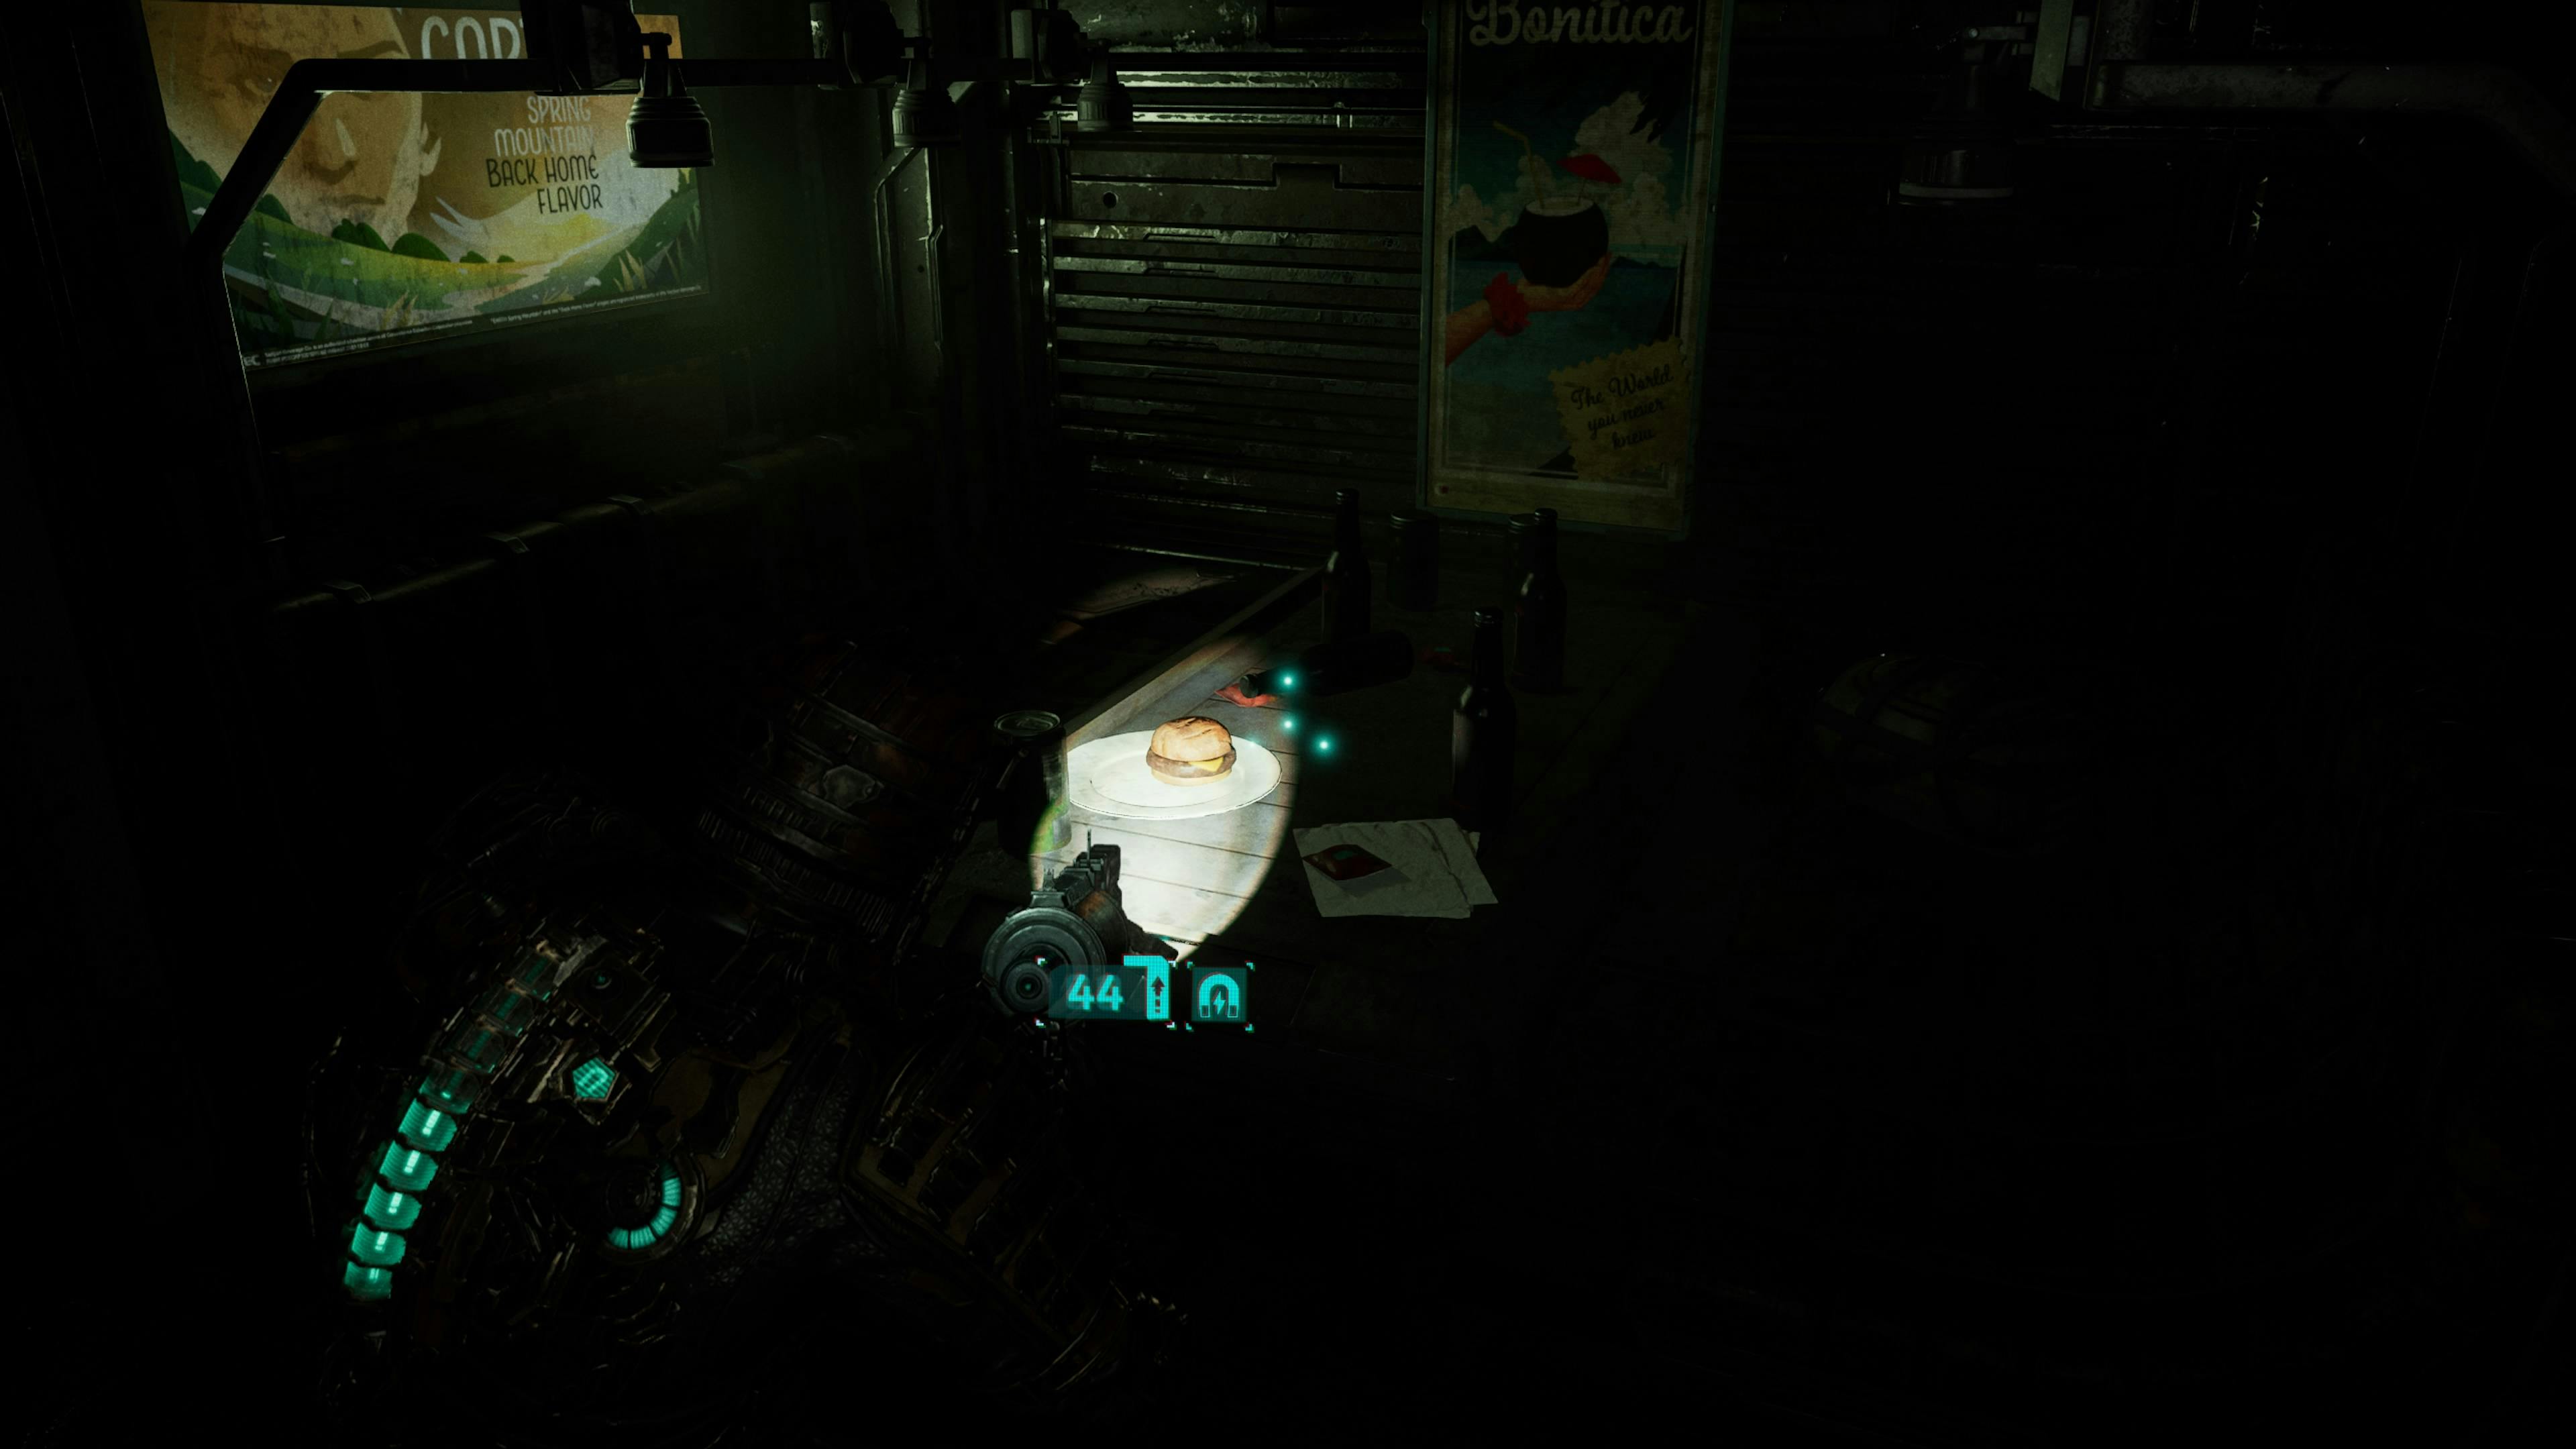 Dead Space screenshot. Isaac is pointing his light/gun at a burger sitting on a table on the Ishimura.